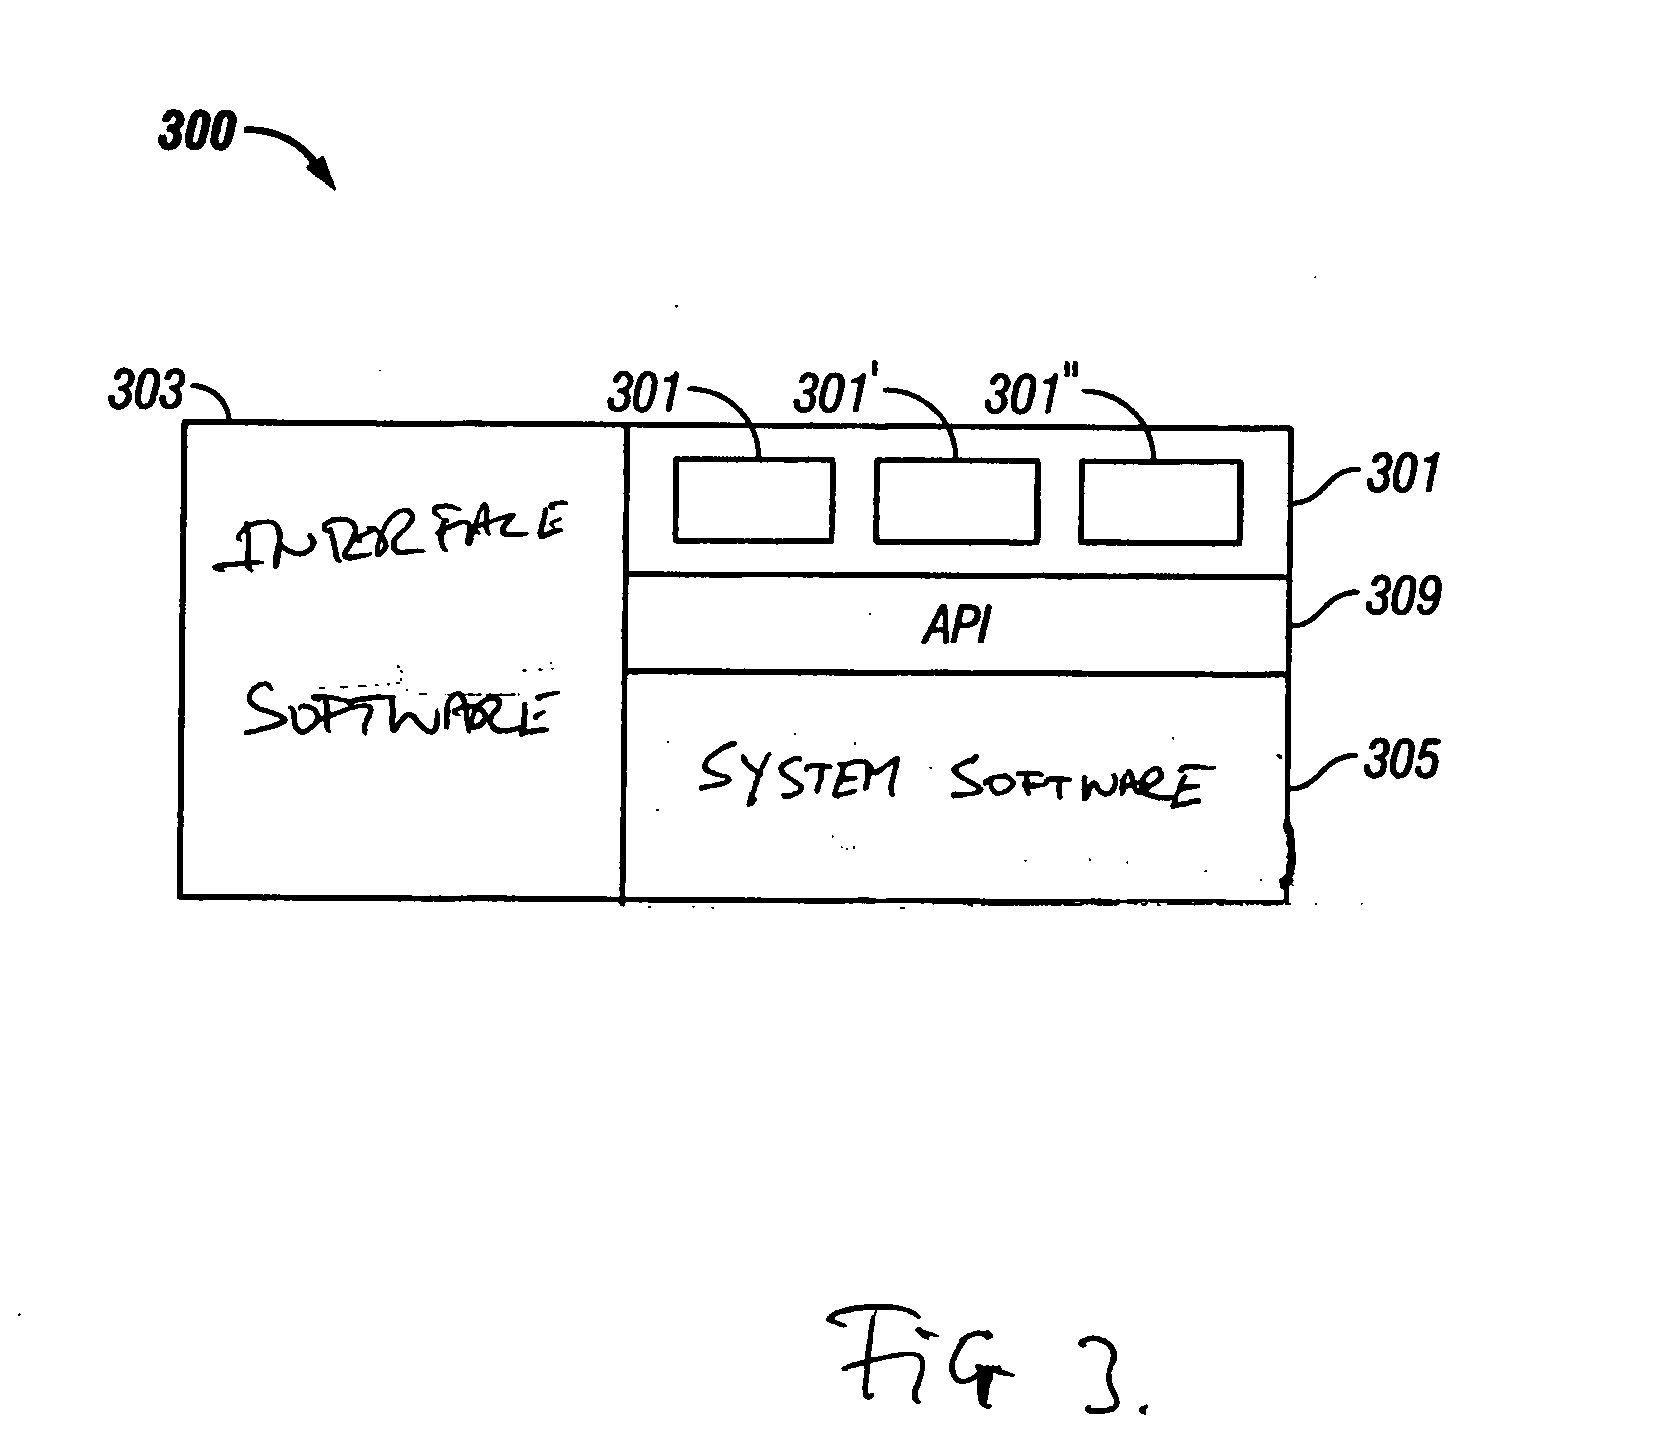 System and method of secure login on insecure systems